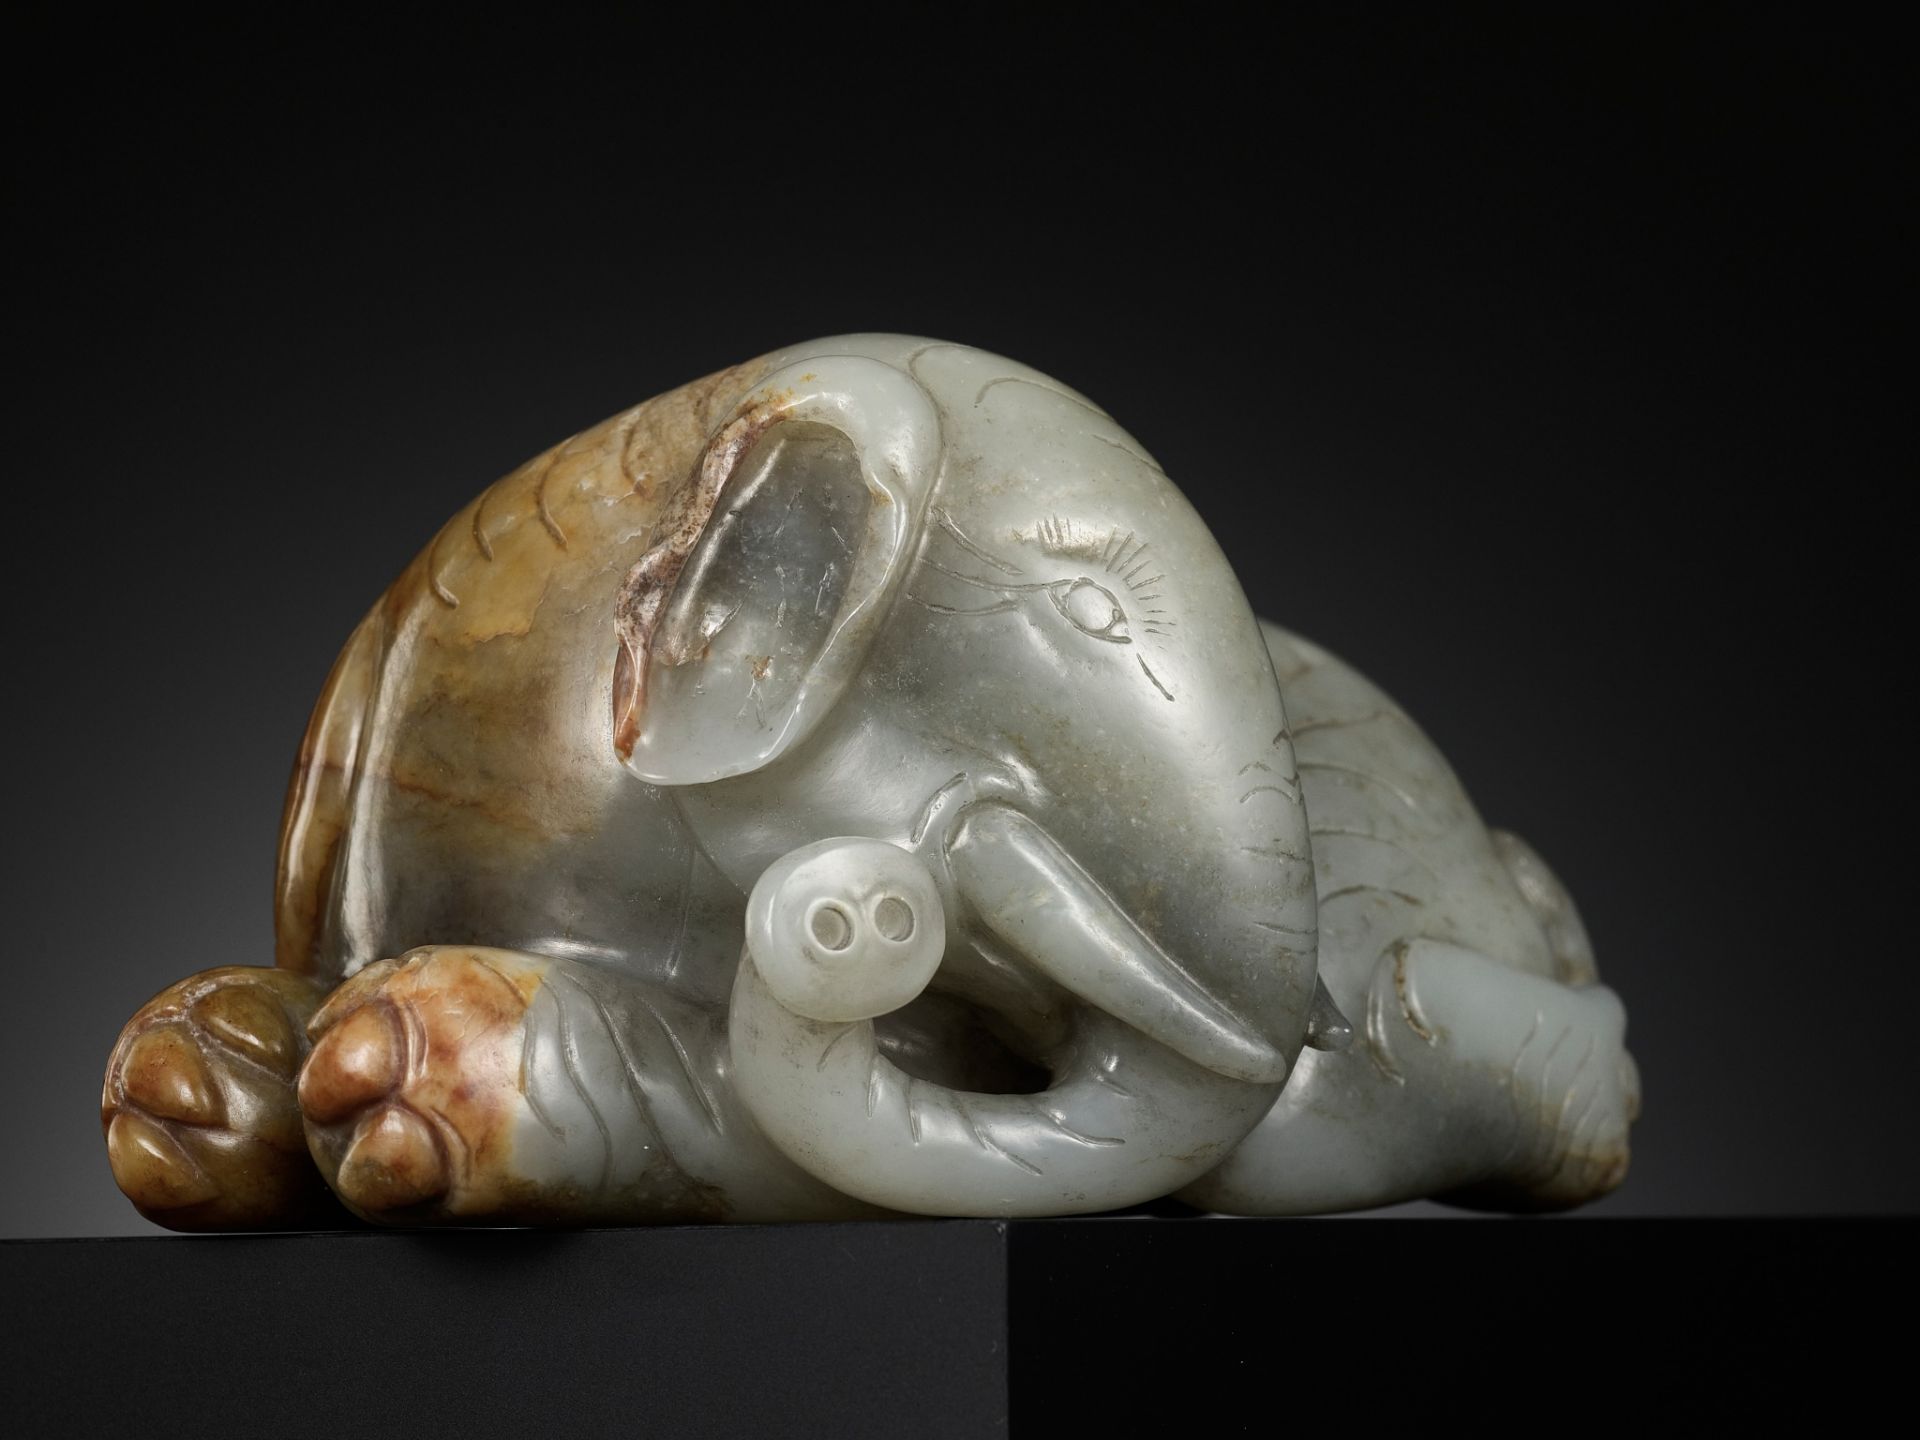 A GRAY AND RUSSET JADE FIGURE OF A RECUMBENT ELEPHANT, LATE MING TO MID-QING DYNASTY